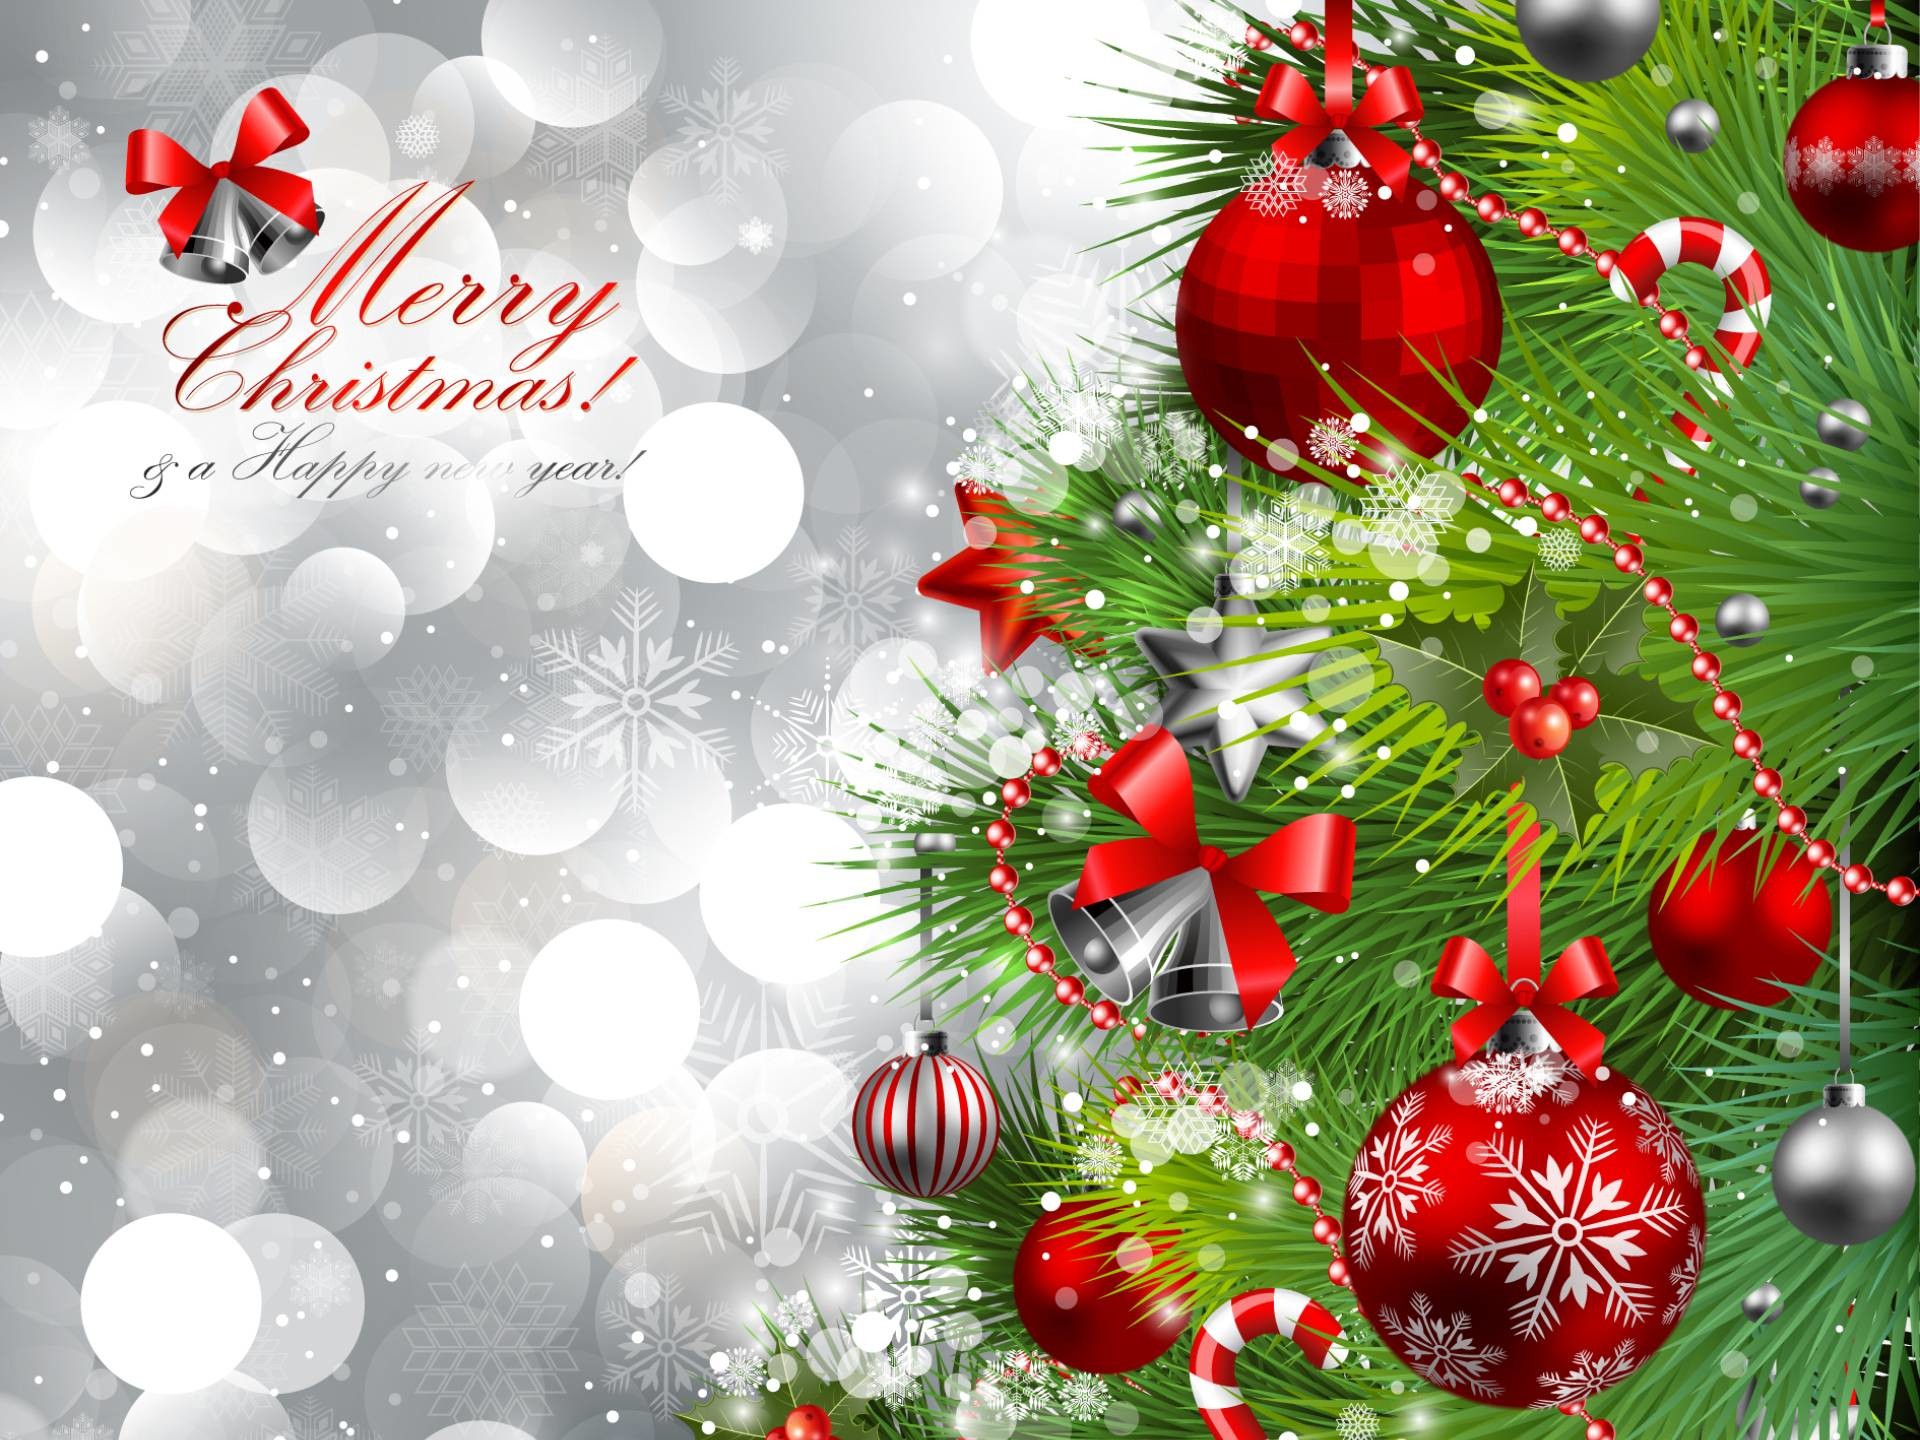 1920x1440 Merry Christmas Wallpapers - Wallpaper Cave